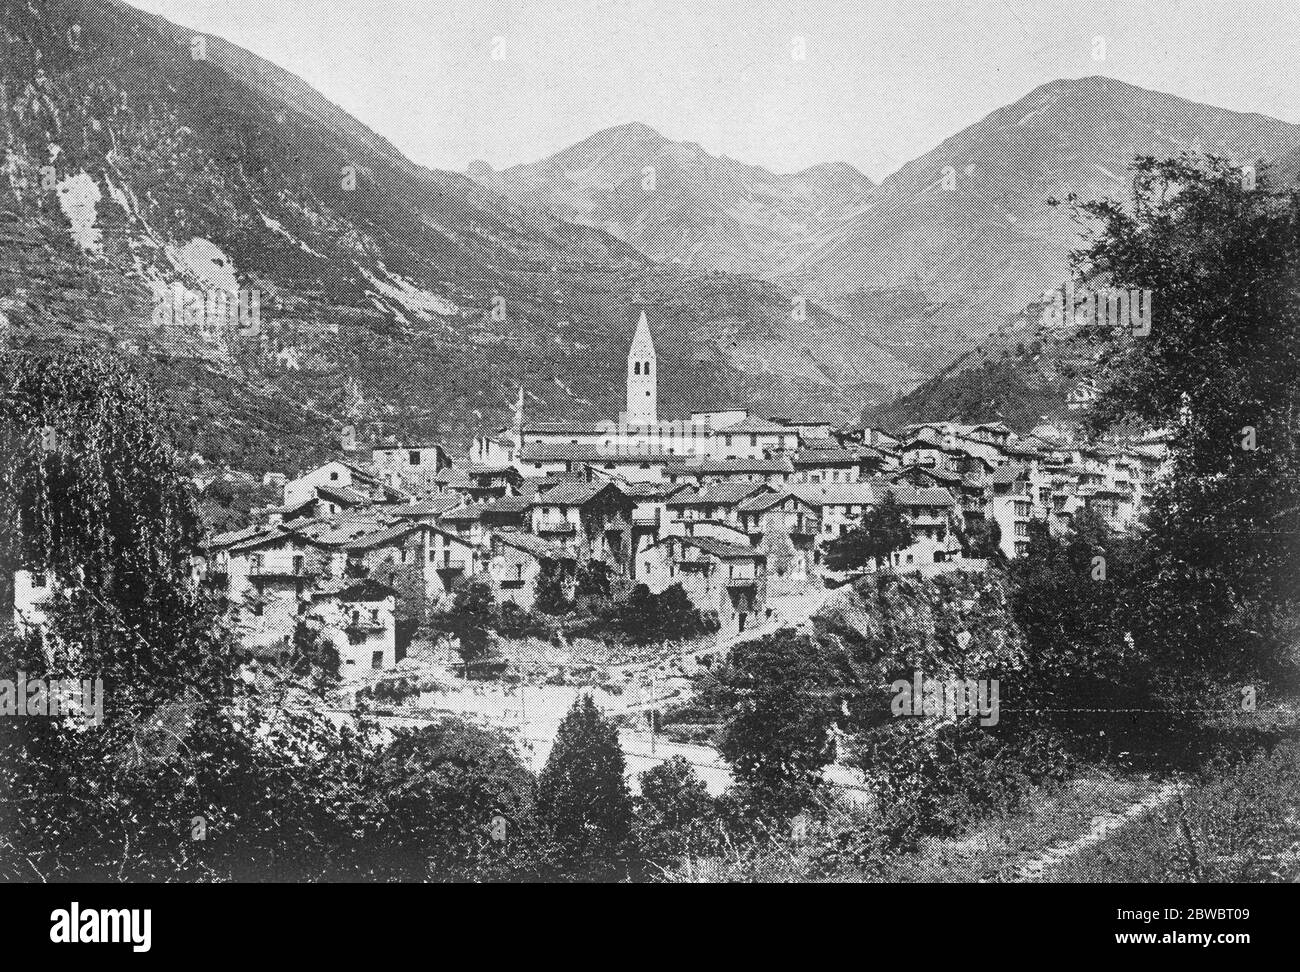 Village cut off by landslide . The village of St Martin de Vesubie , which has been cut off by the Riviera landslide . 25 November 1926 Stock Photo